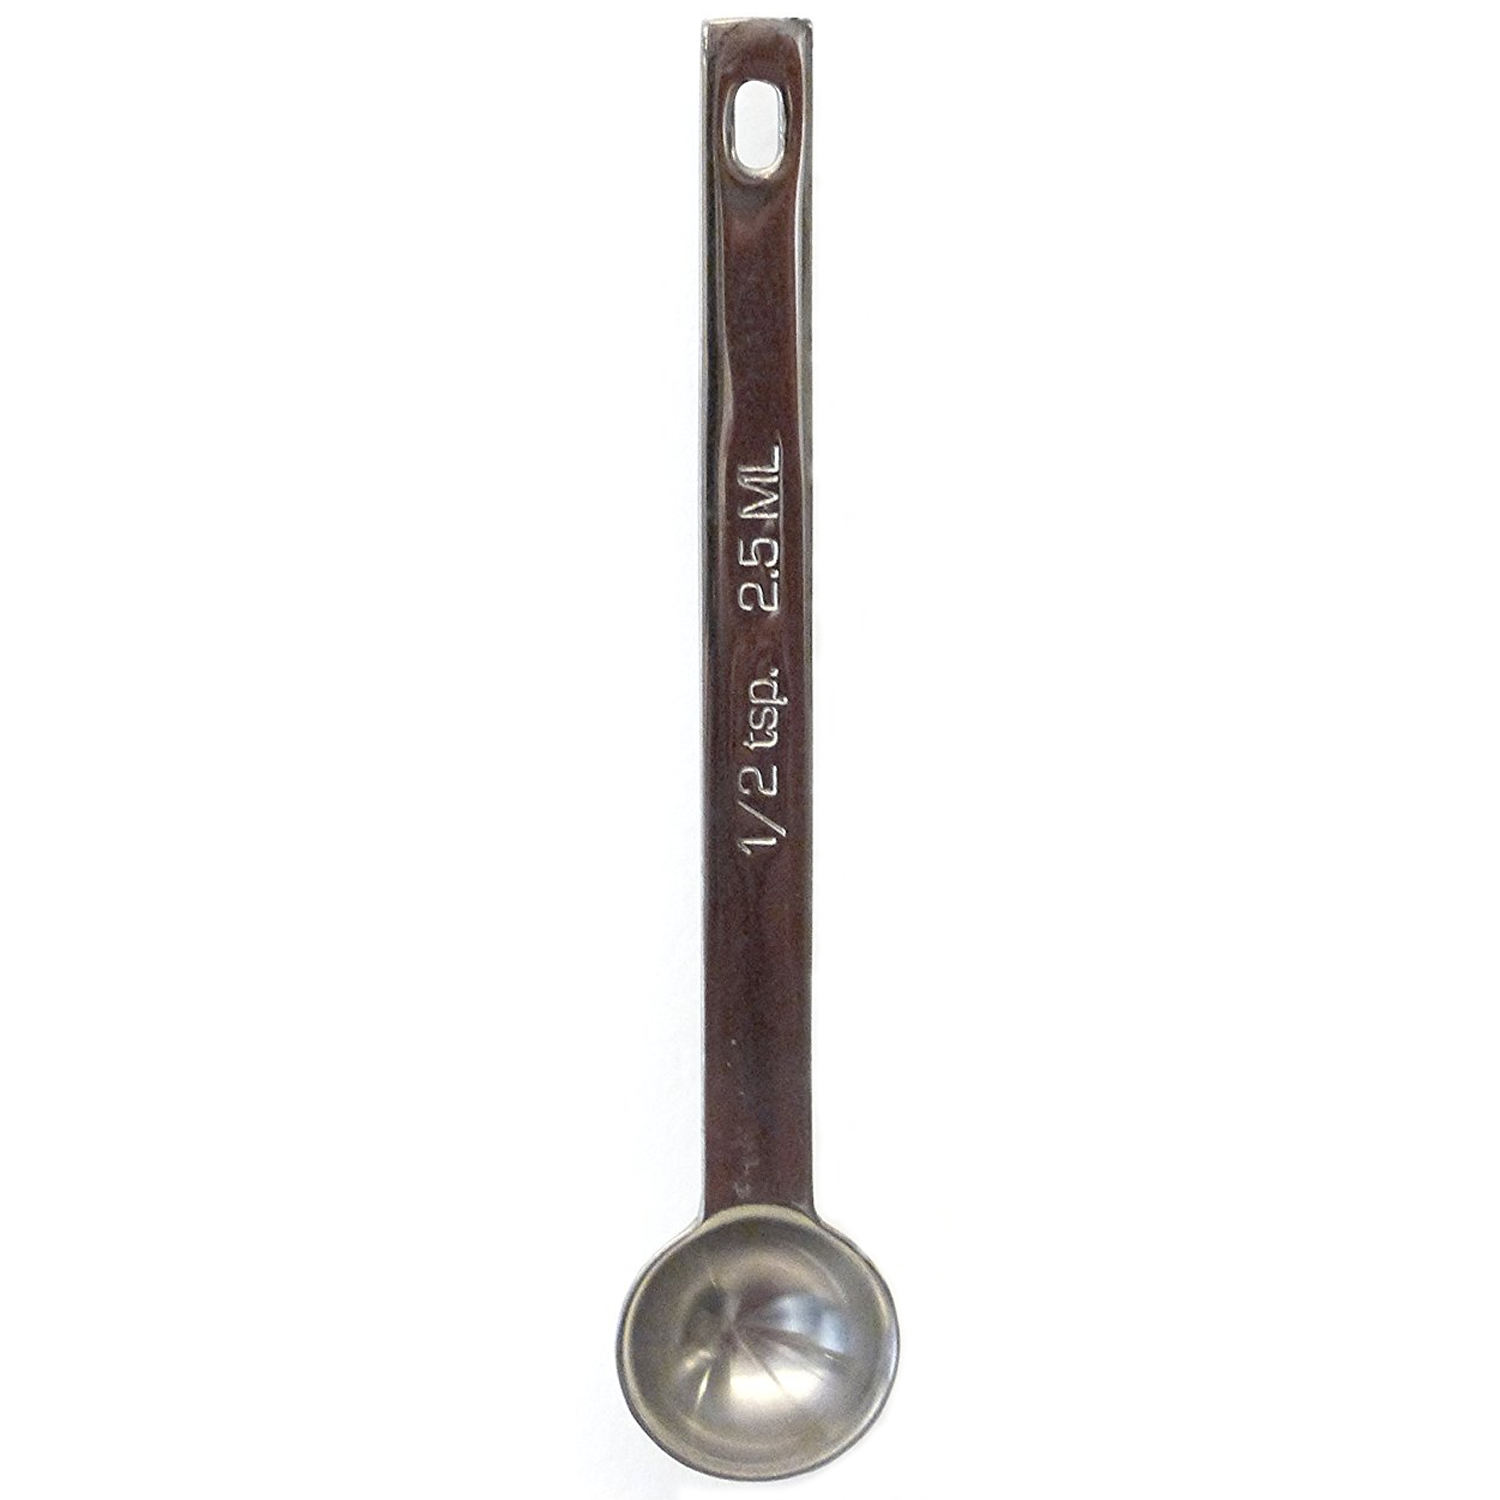 RSVP Measuring Spoons, Set of 6 Stainless